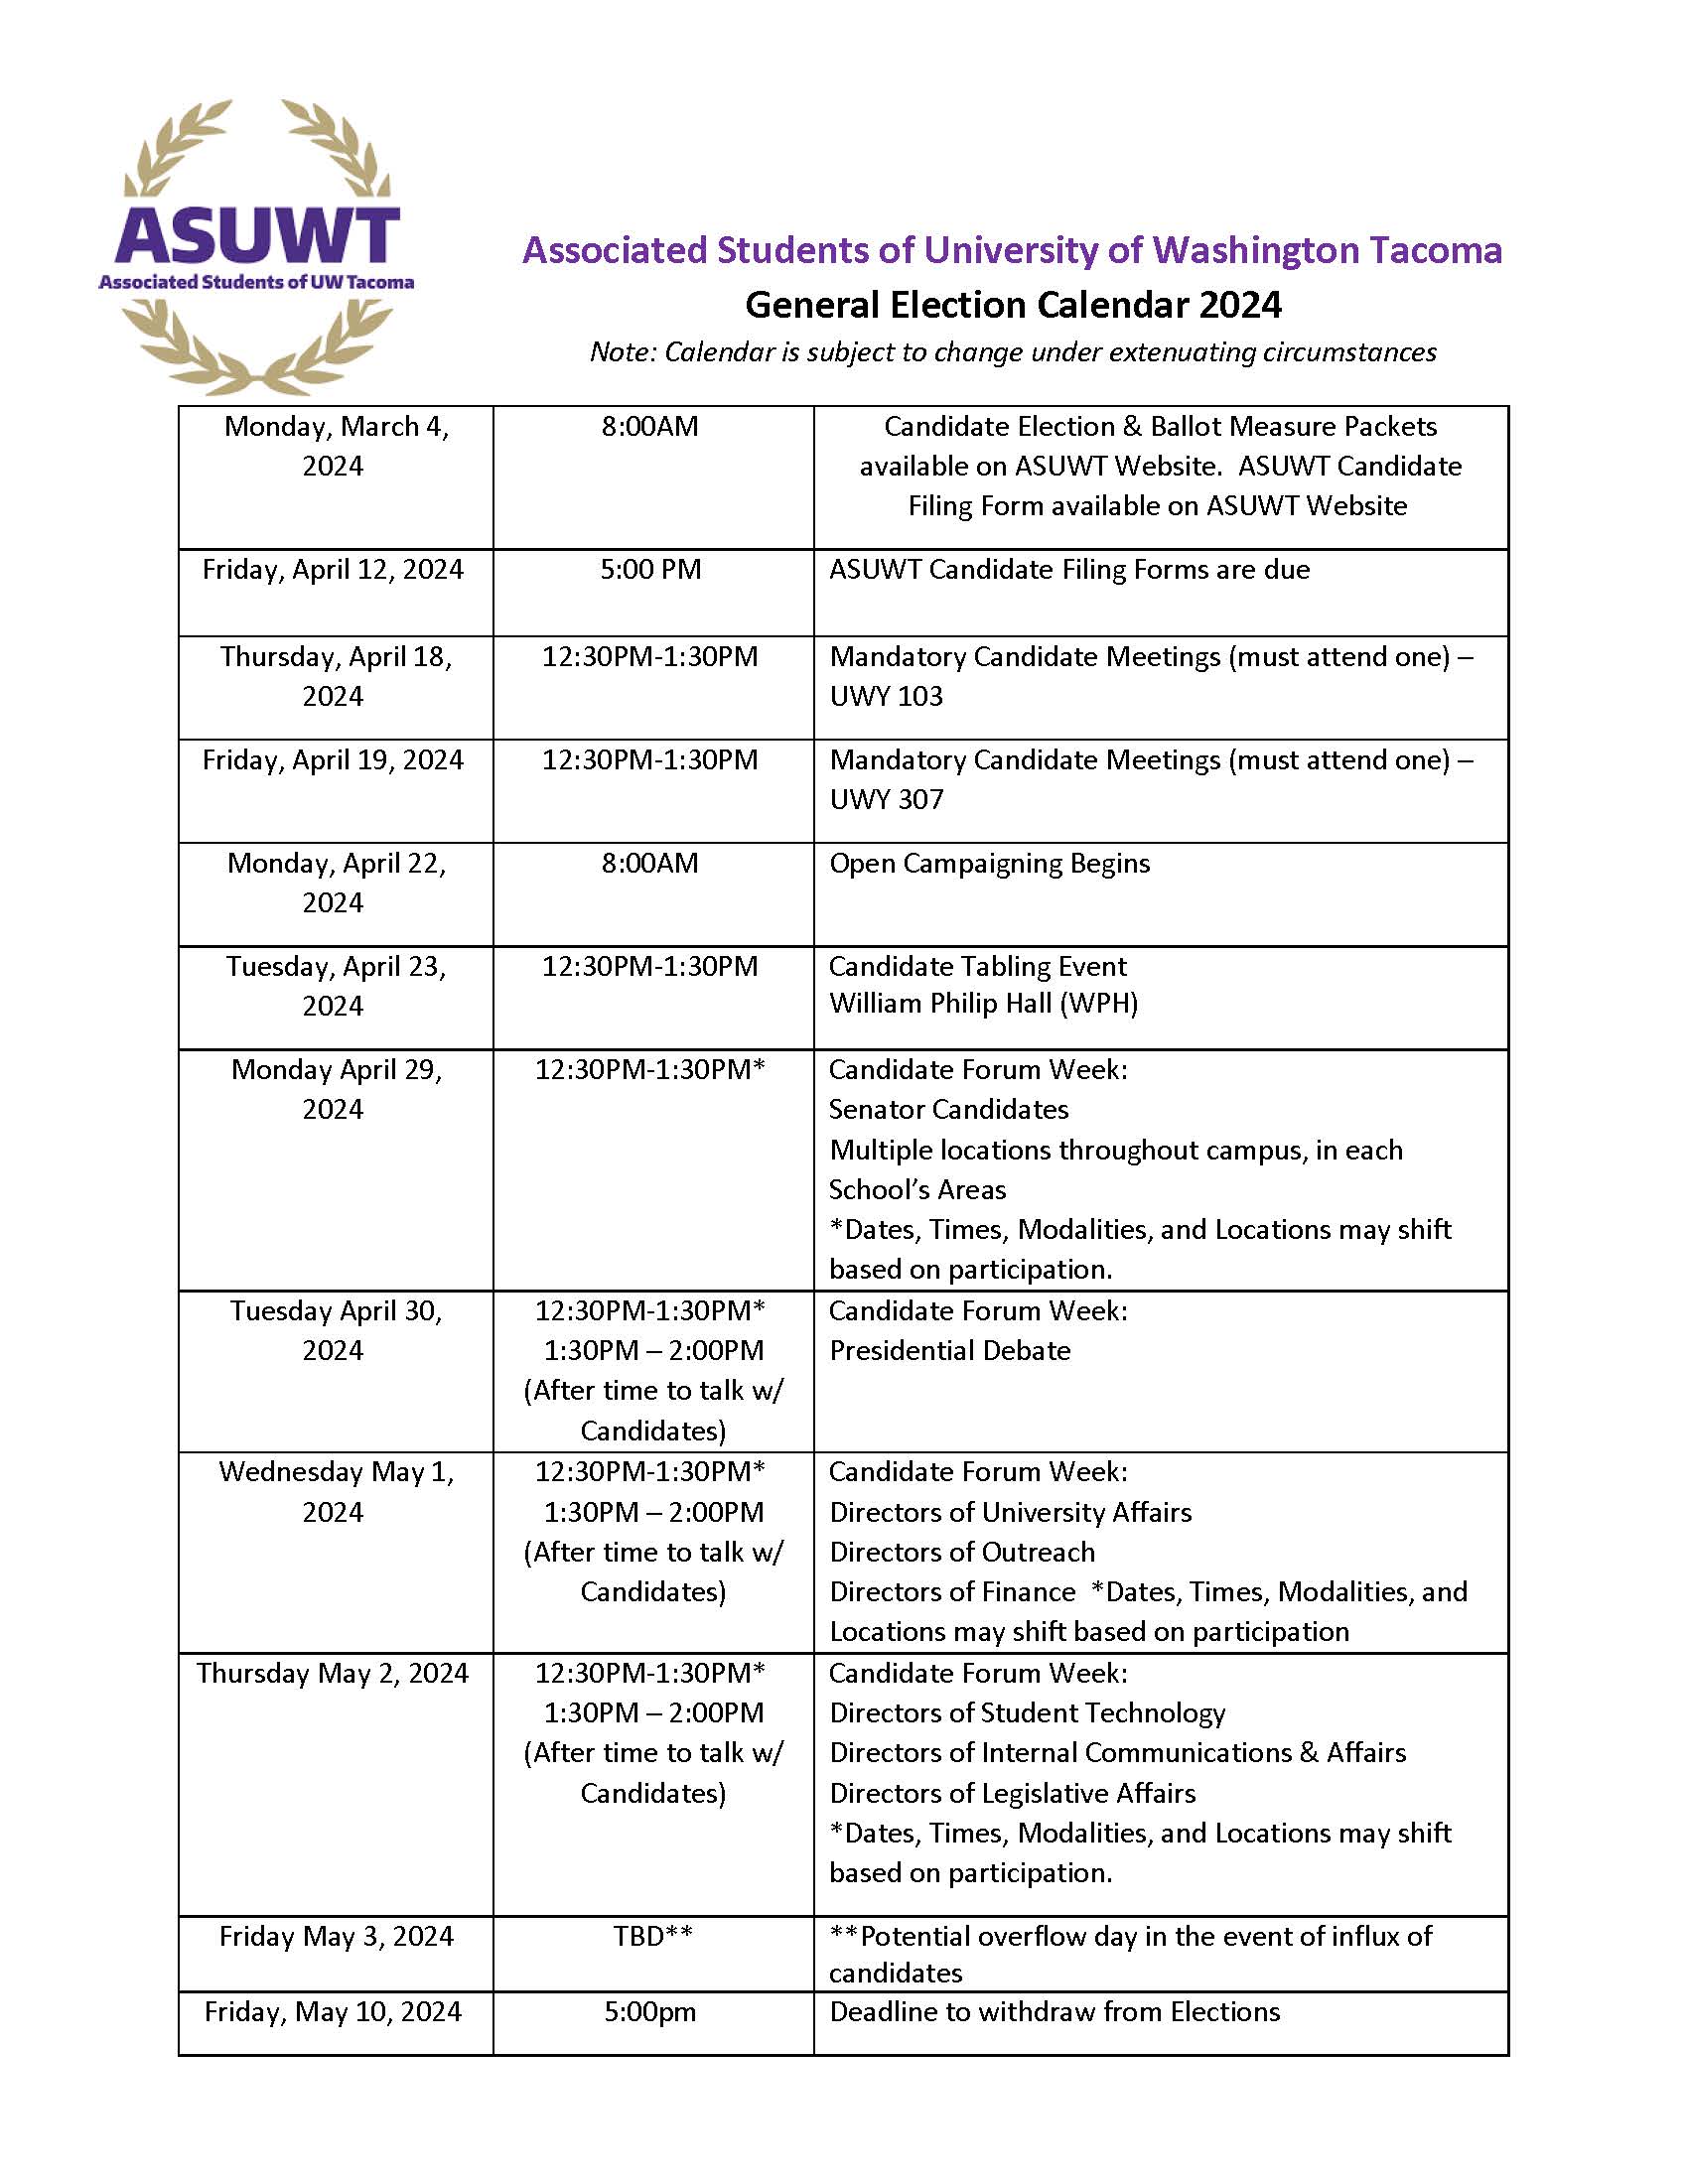 ASUWT Elections Calendar 2024 - Page 1